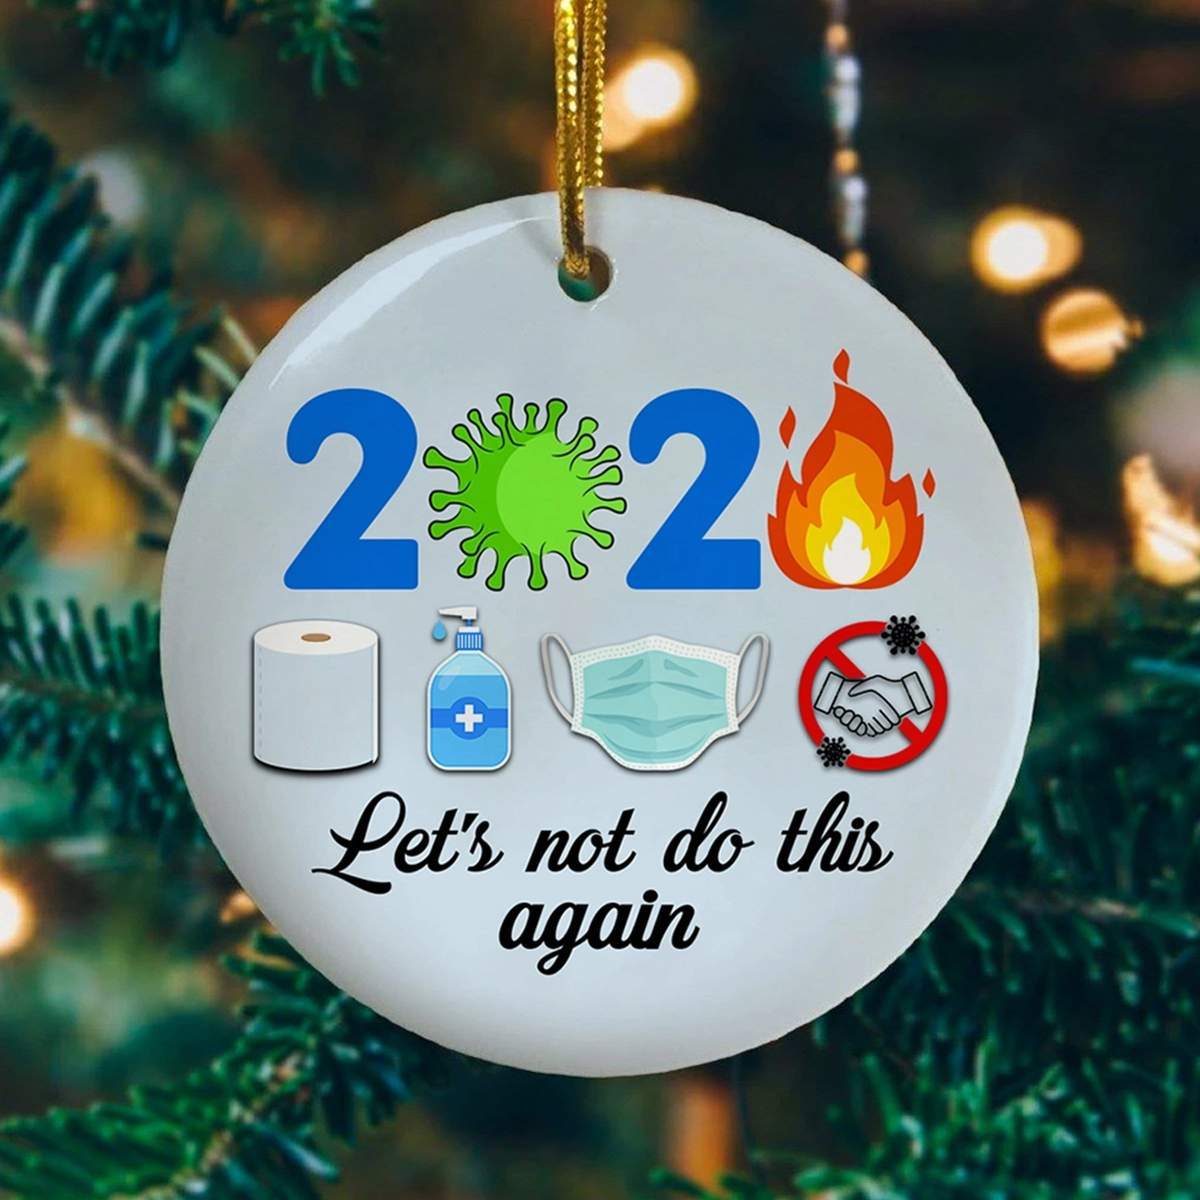 2020 Not Do This Again Decorative Christmas Ornament